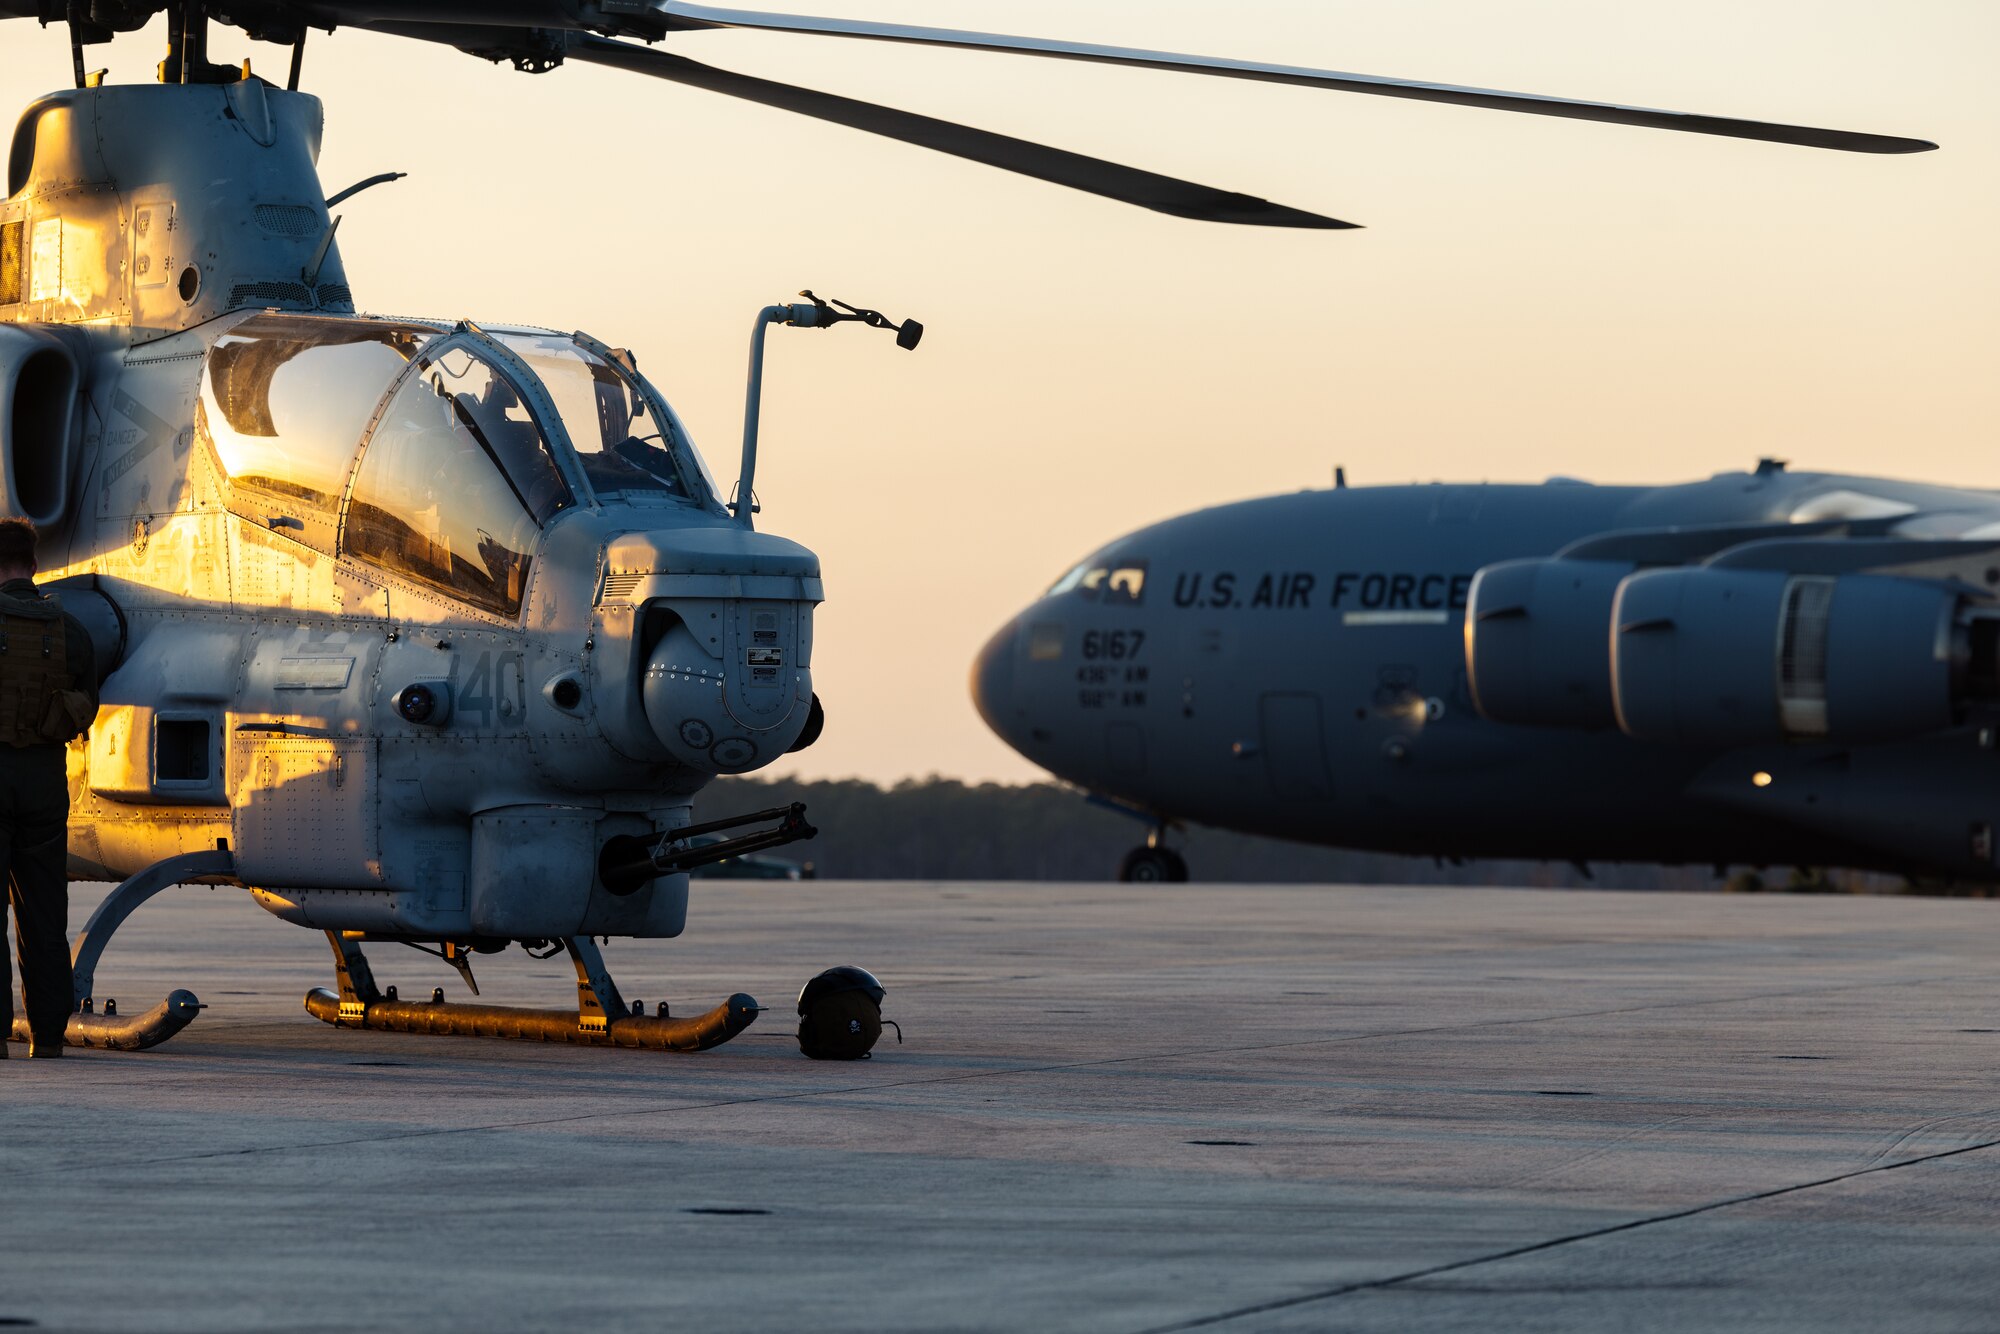 The 621st Contingency Response Group conducted Exercise Diavoli Vale to show its interoperability with other forces as well as its self-sufficient capabilities which allow it to open, operate and/or close any airfield around the globe.